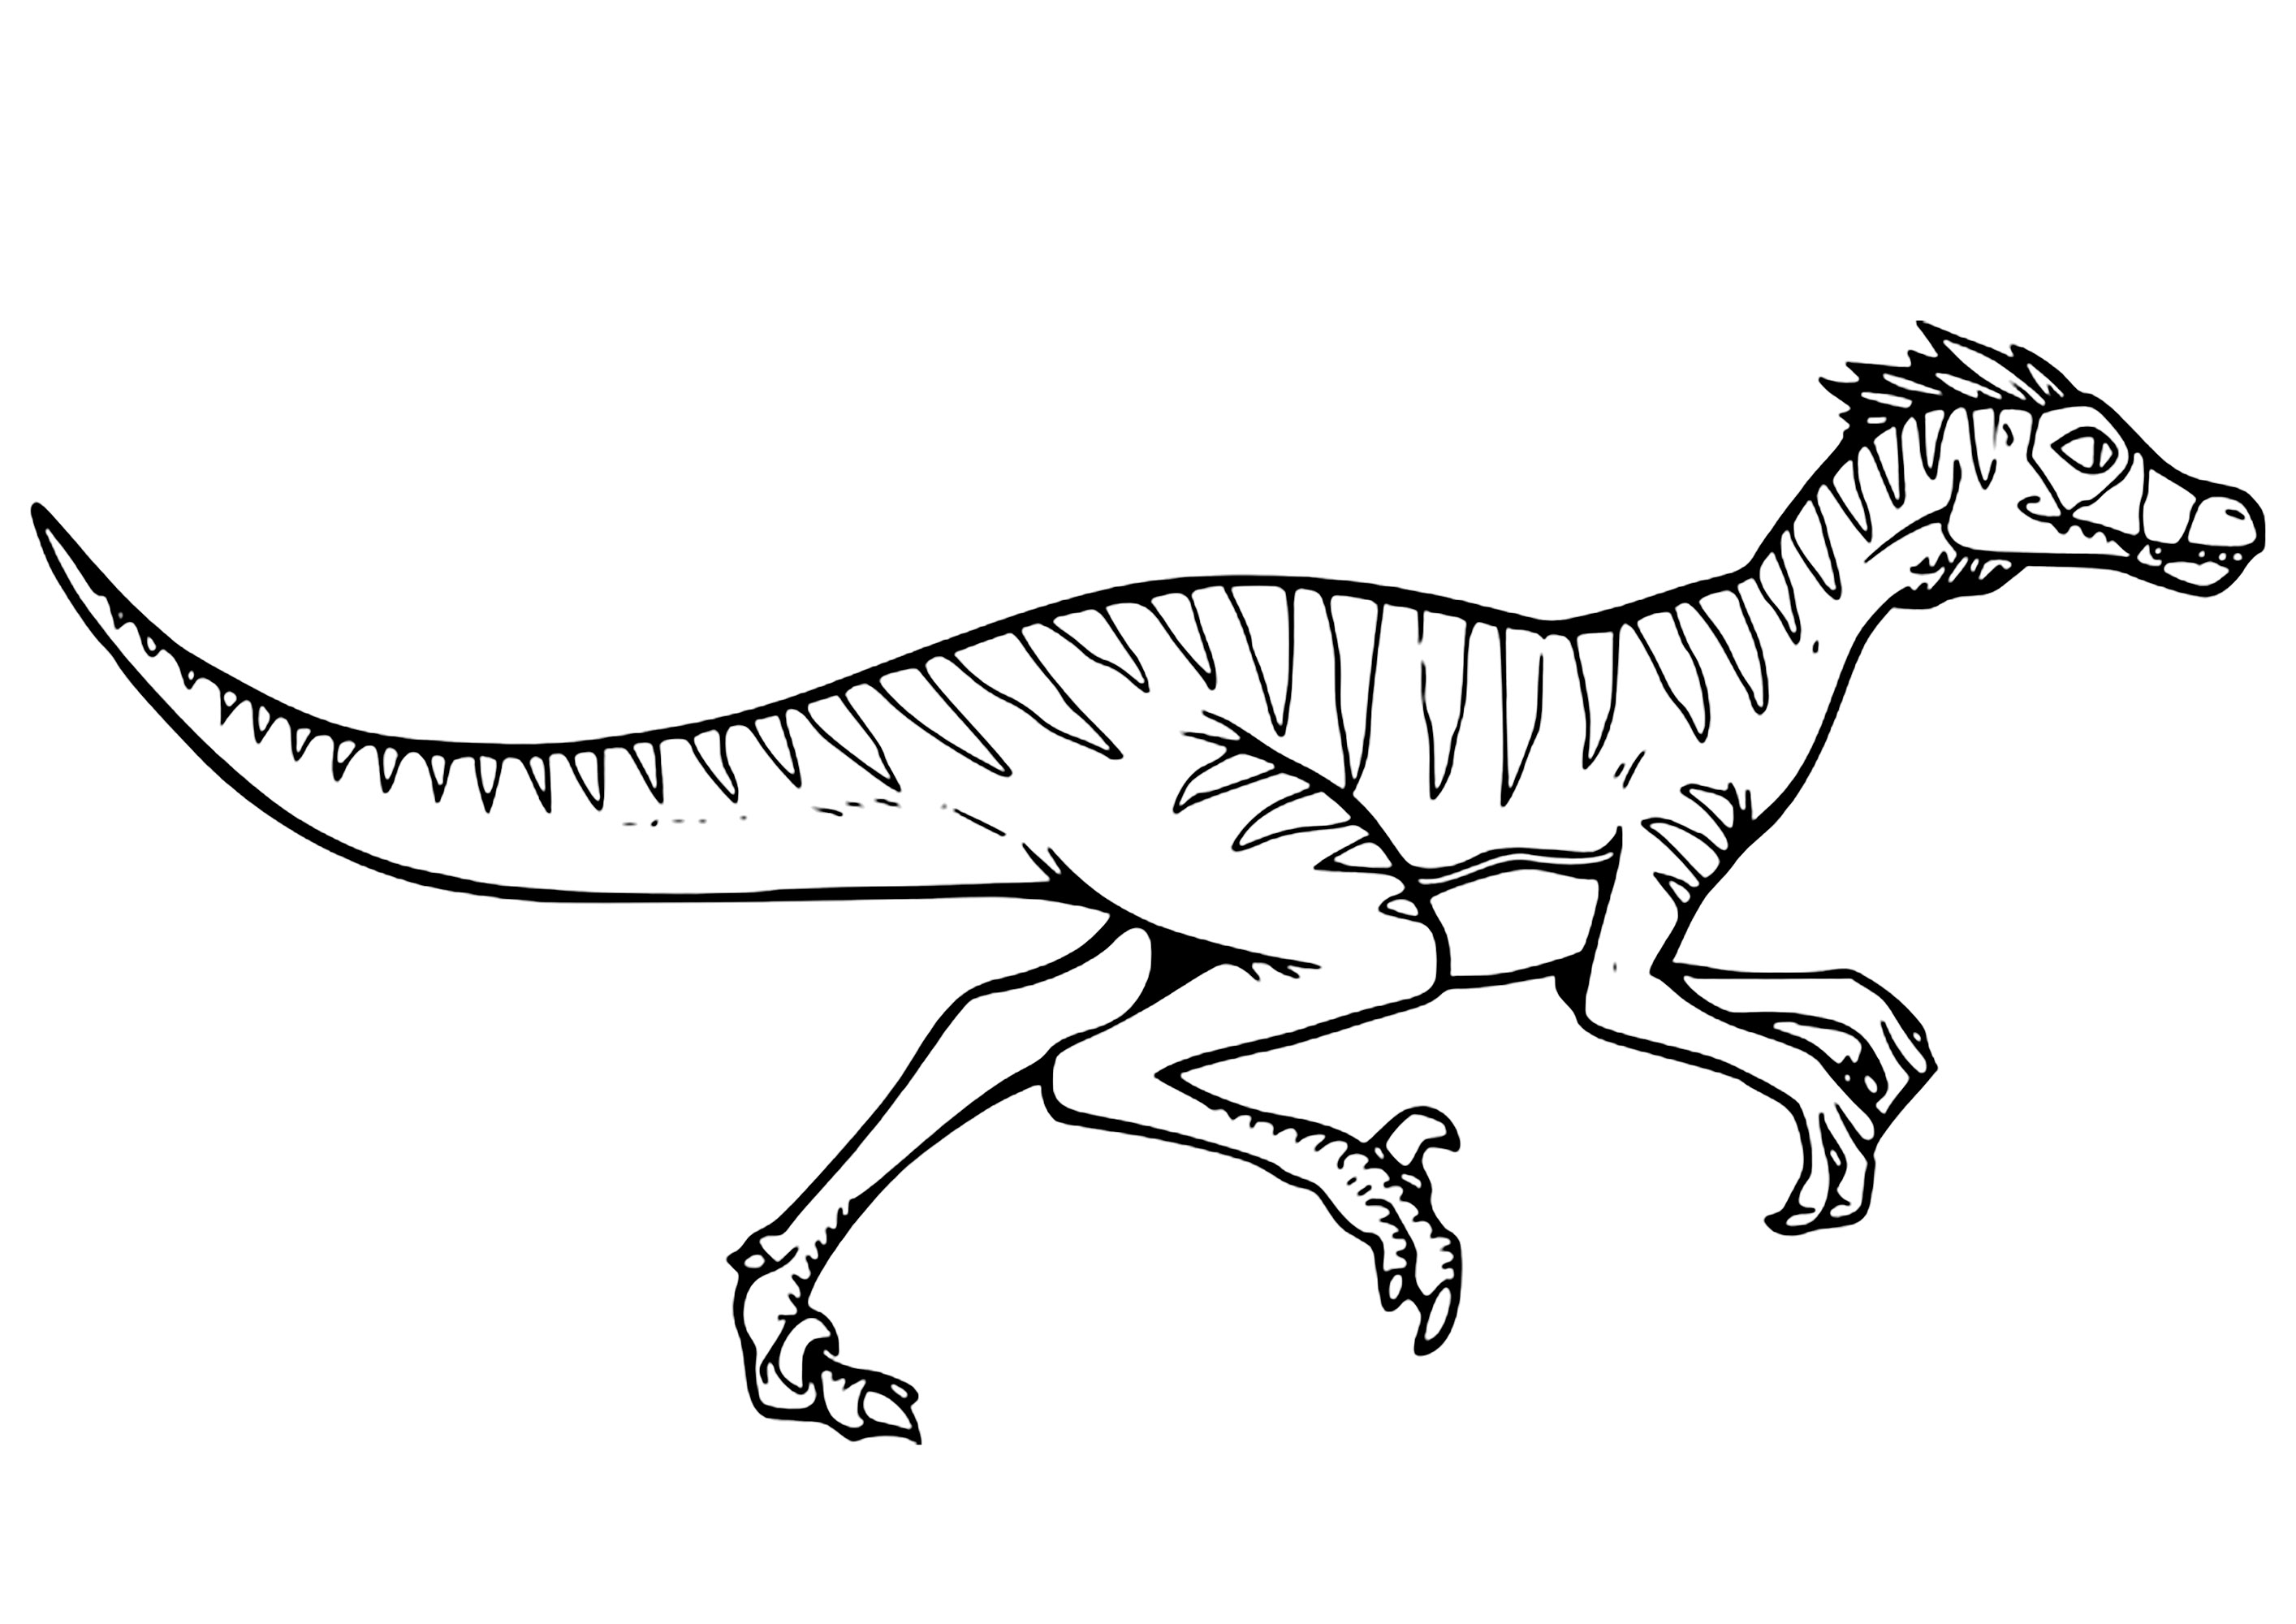 Free Dinosaurs coloring page to print and color, for kids